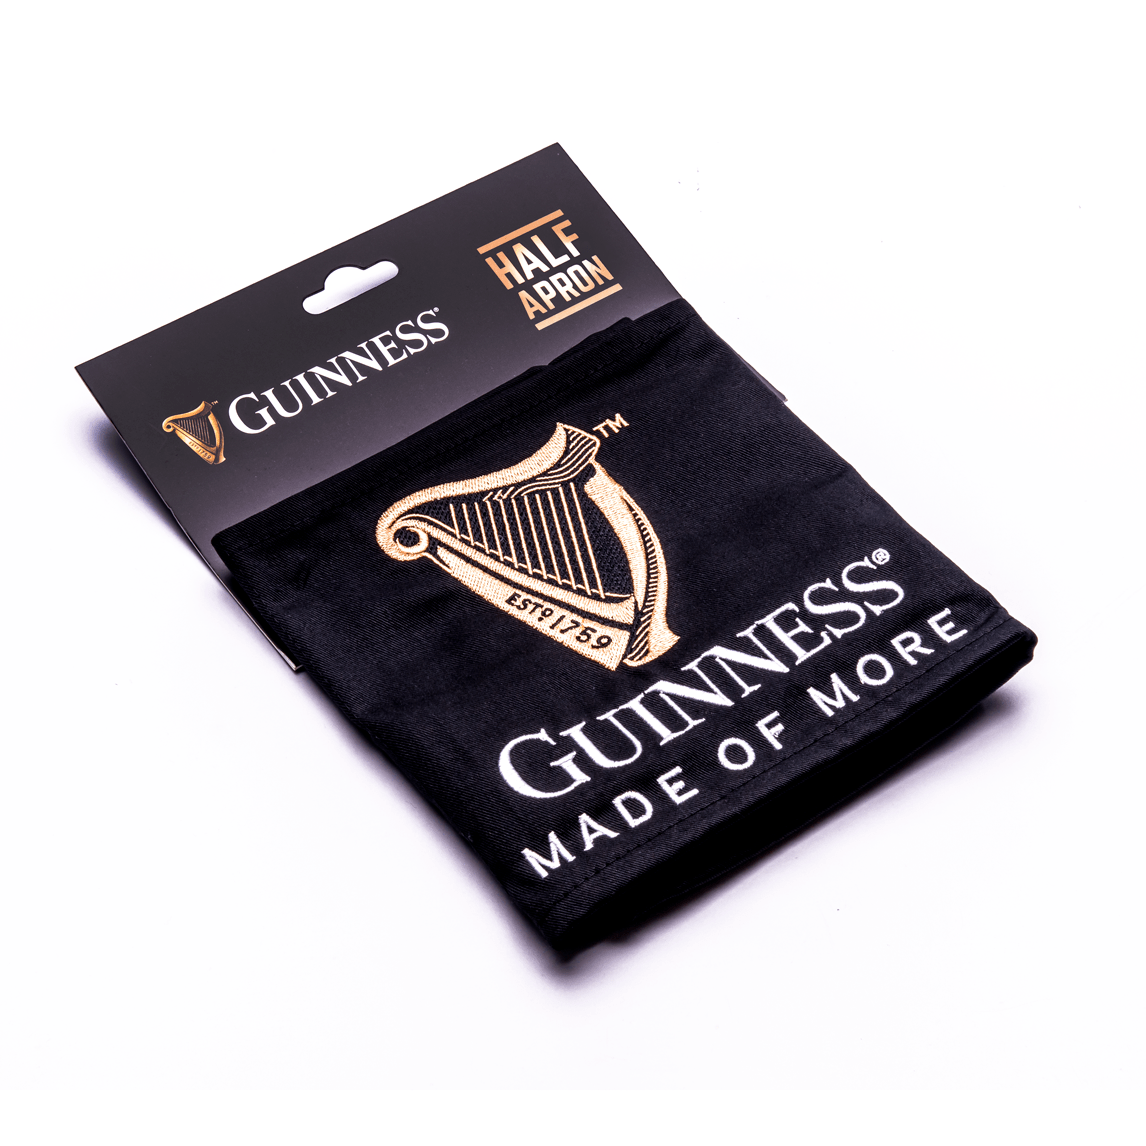 Guinness Kitchen Gift Box towel for coffee lovers in Ireland.